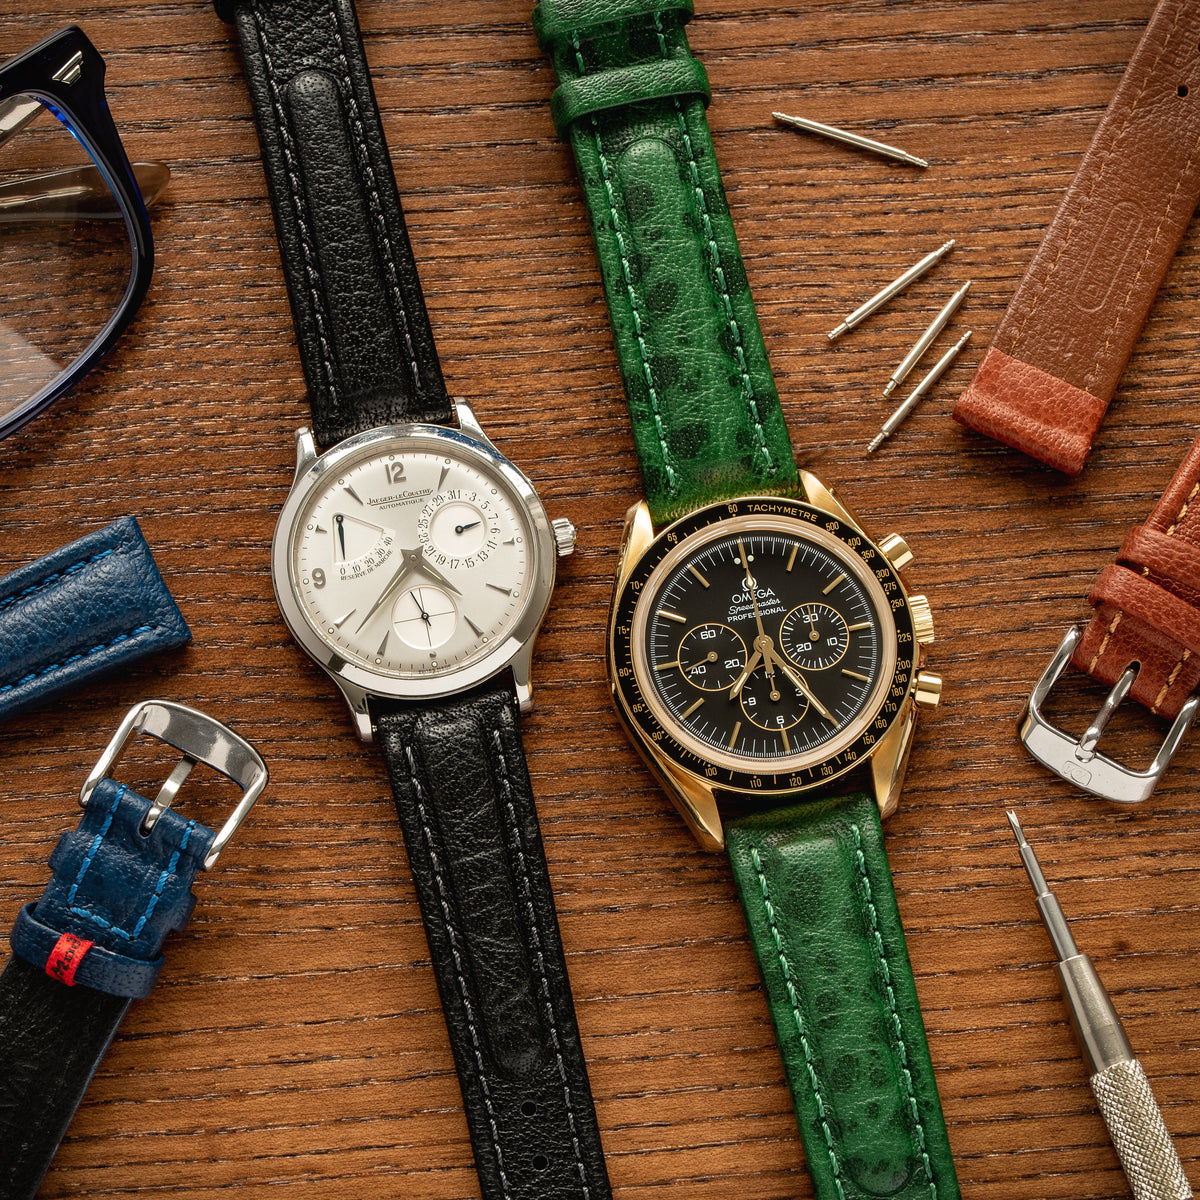 JLC and Omega watches amongst Di-modell straps on wooden desktop